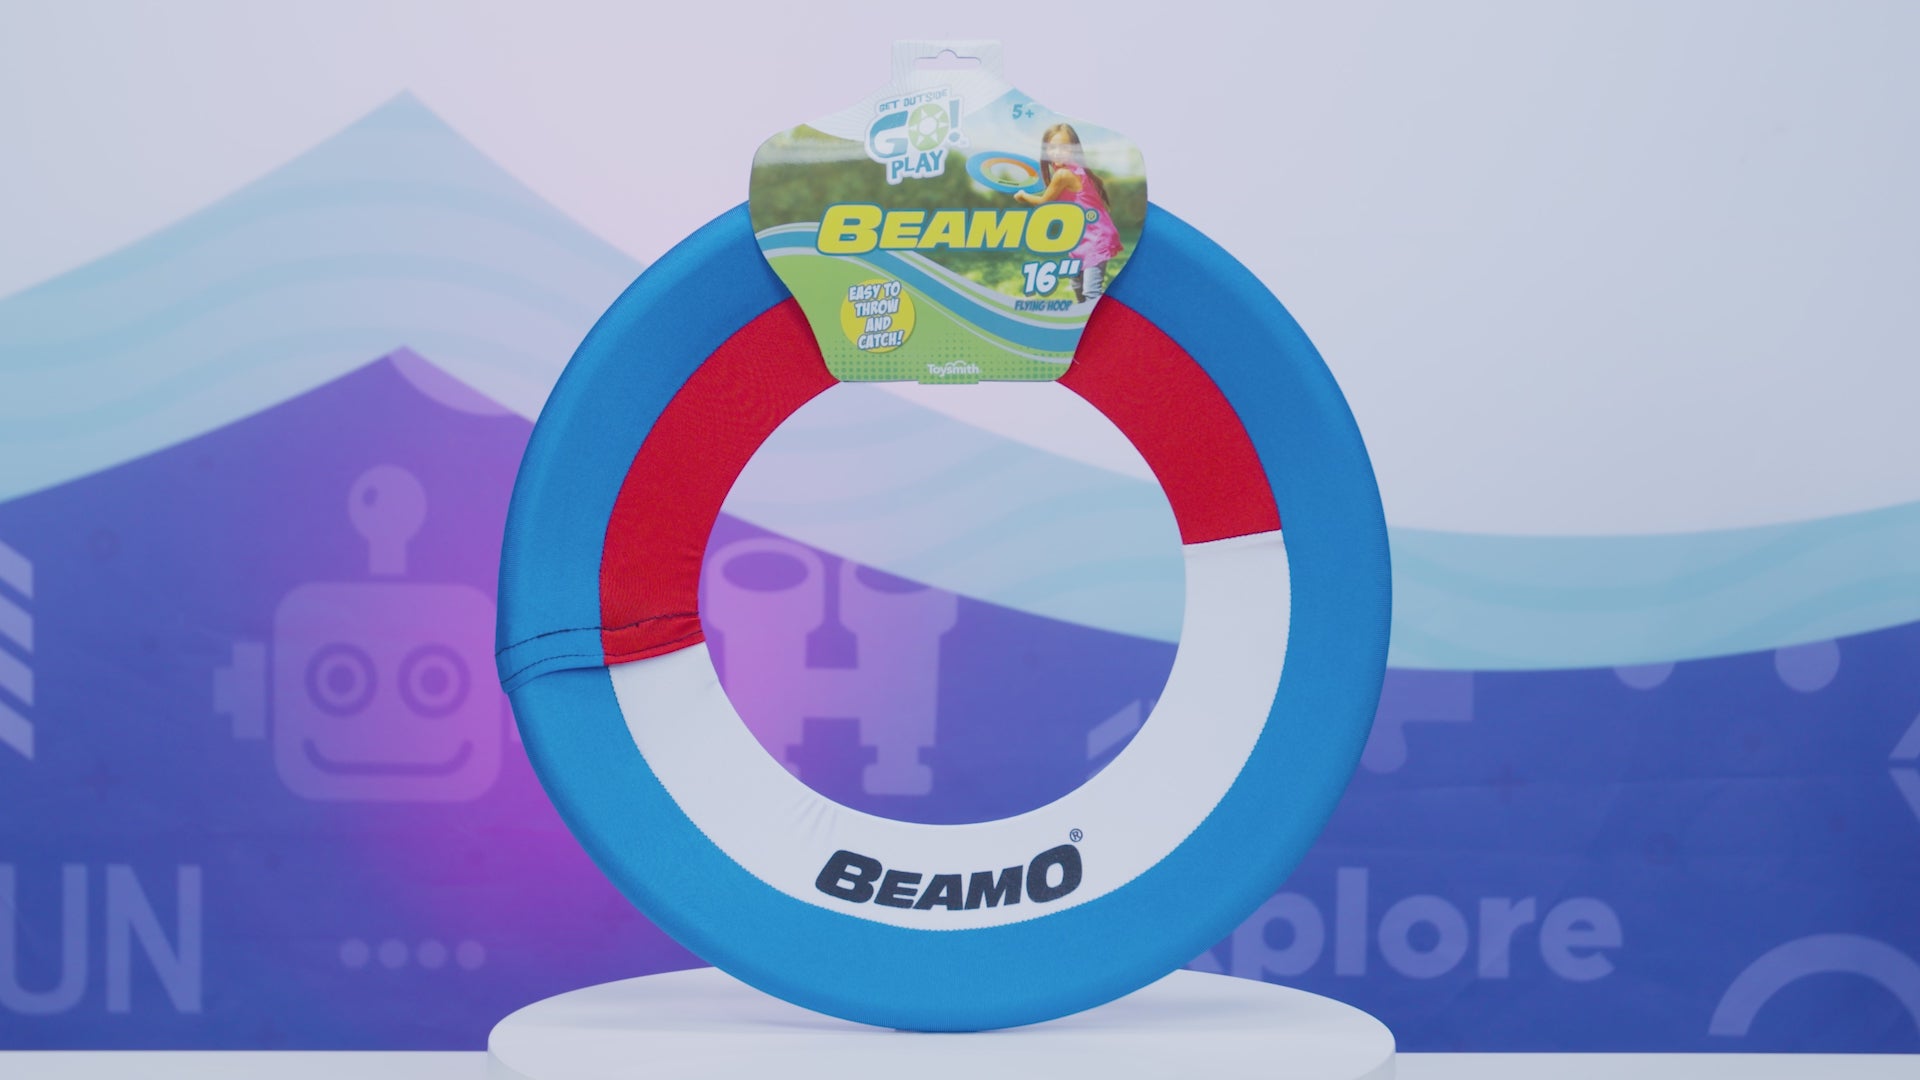 Video displaying Beamo disk and showing a young boy catching and throwing the Beamo disk outside. Tag states the disk is a foam ring made with soft fabric.